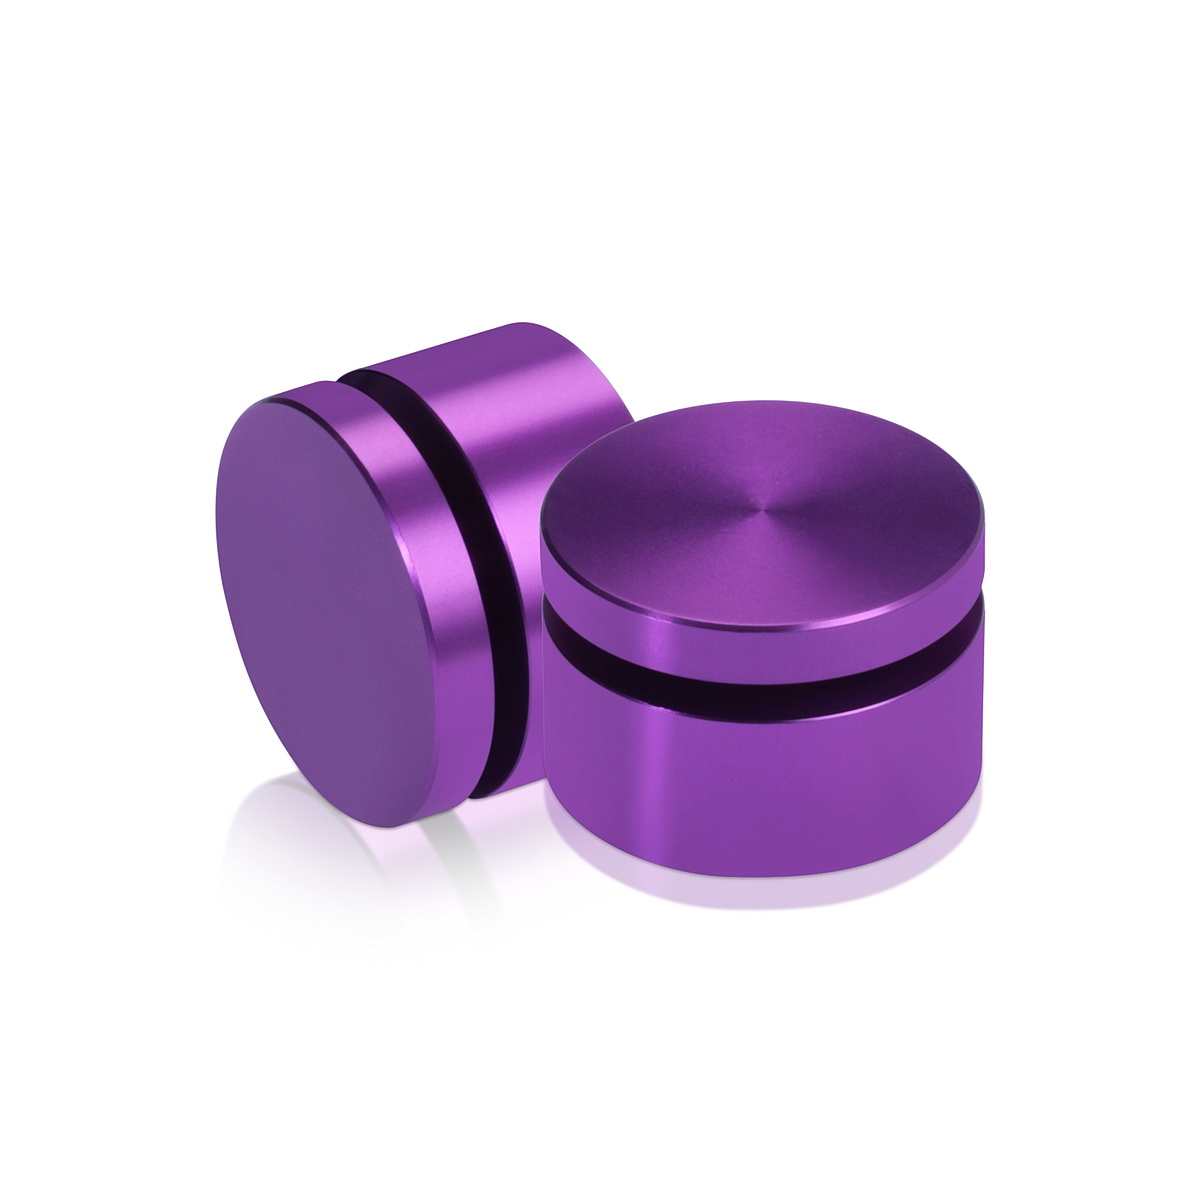 1-1/4'' Diameter X 1/2'' Barrel Length, Affordable Aluminum Standoffs, Purple Anodized Finish Easy Fasten Standoff (For Inside / Outside use) [Required Material Hole Size: 7/16'']